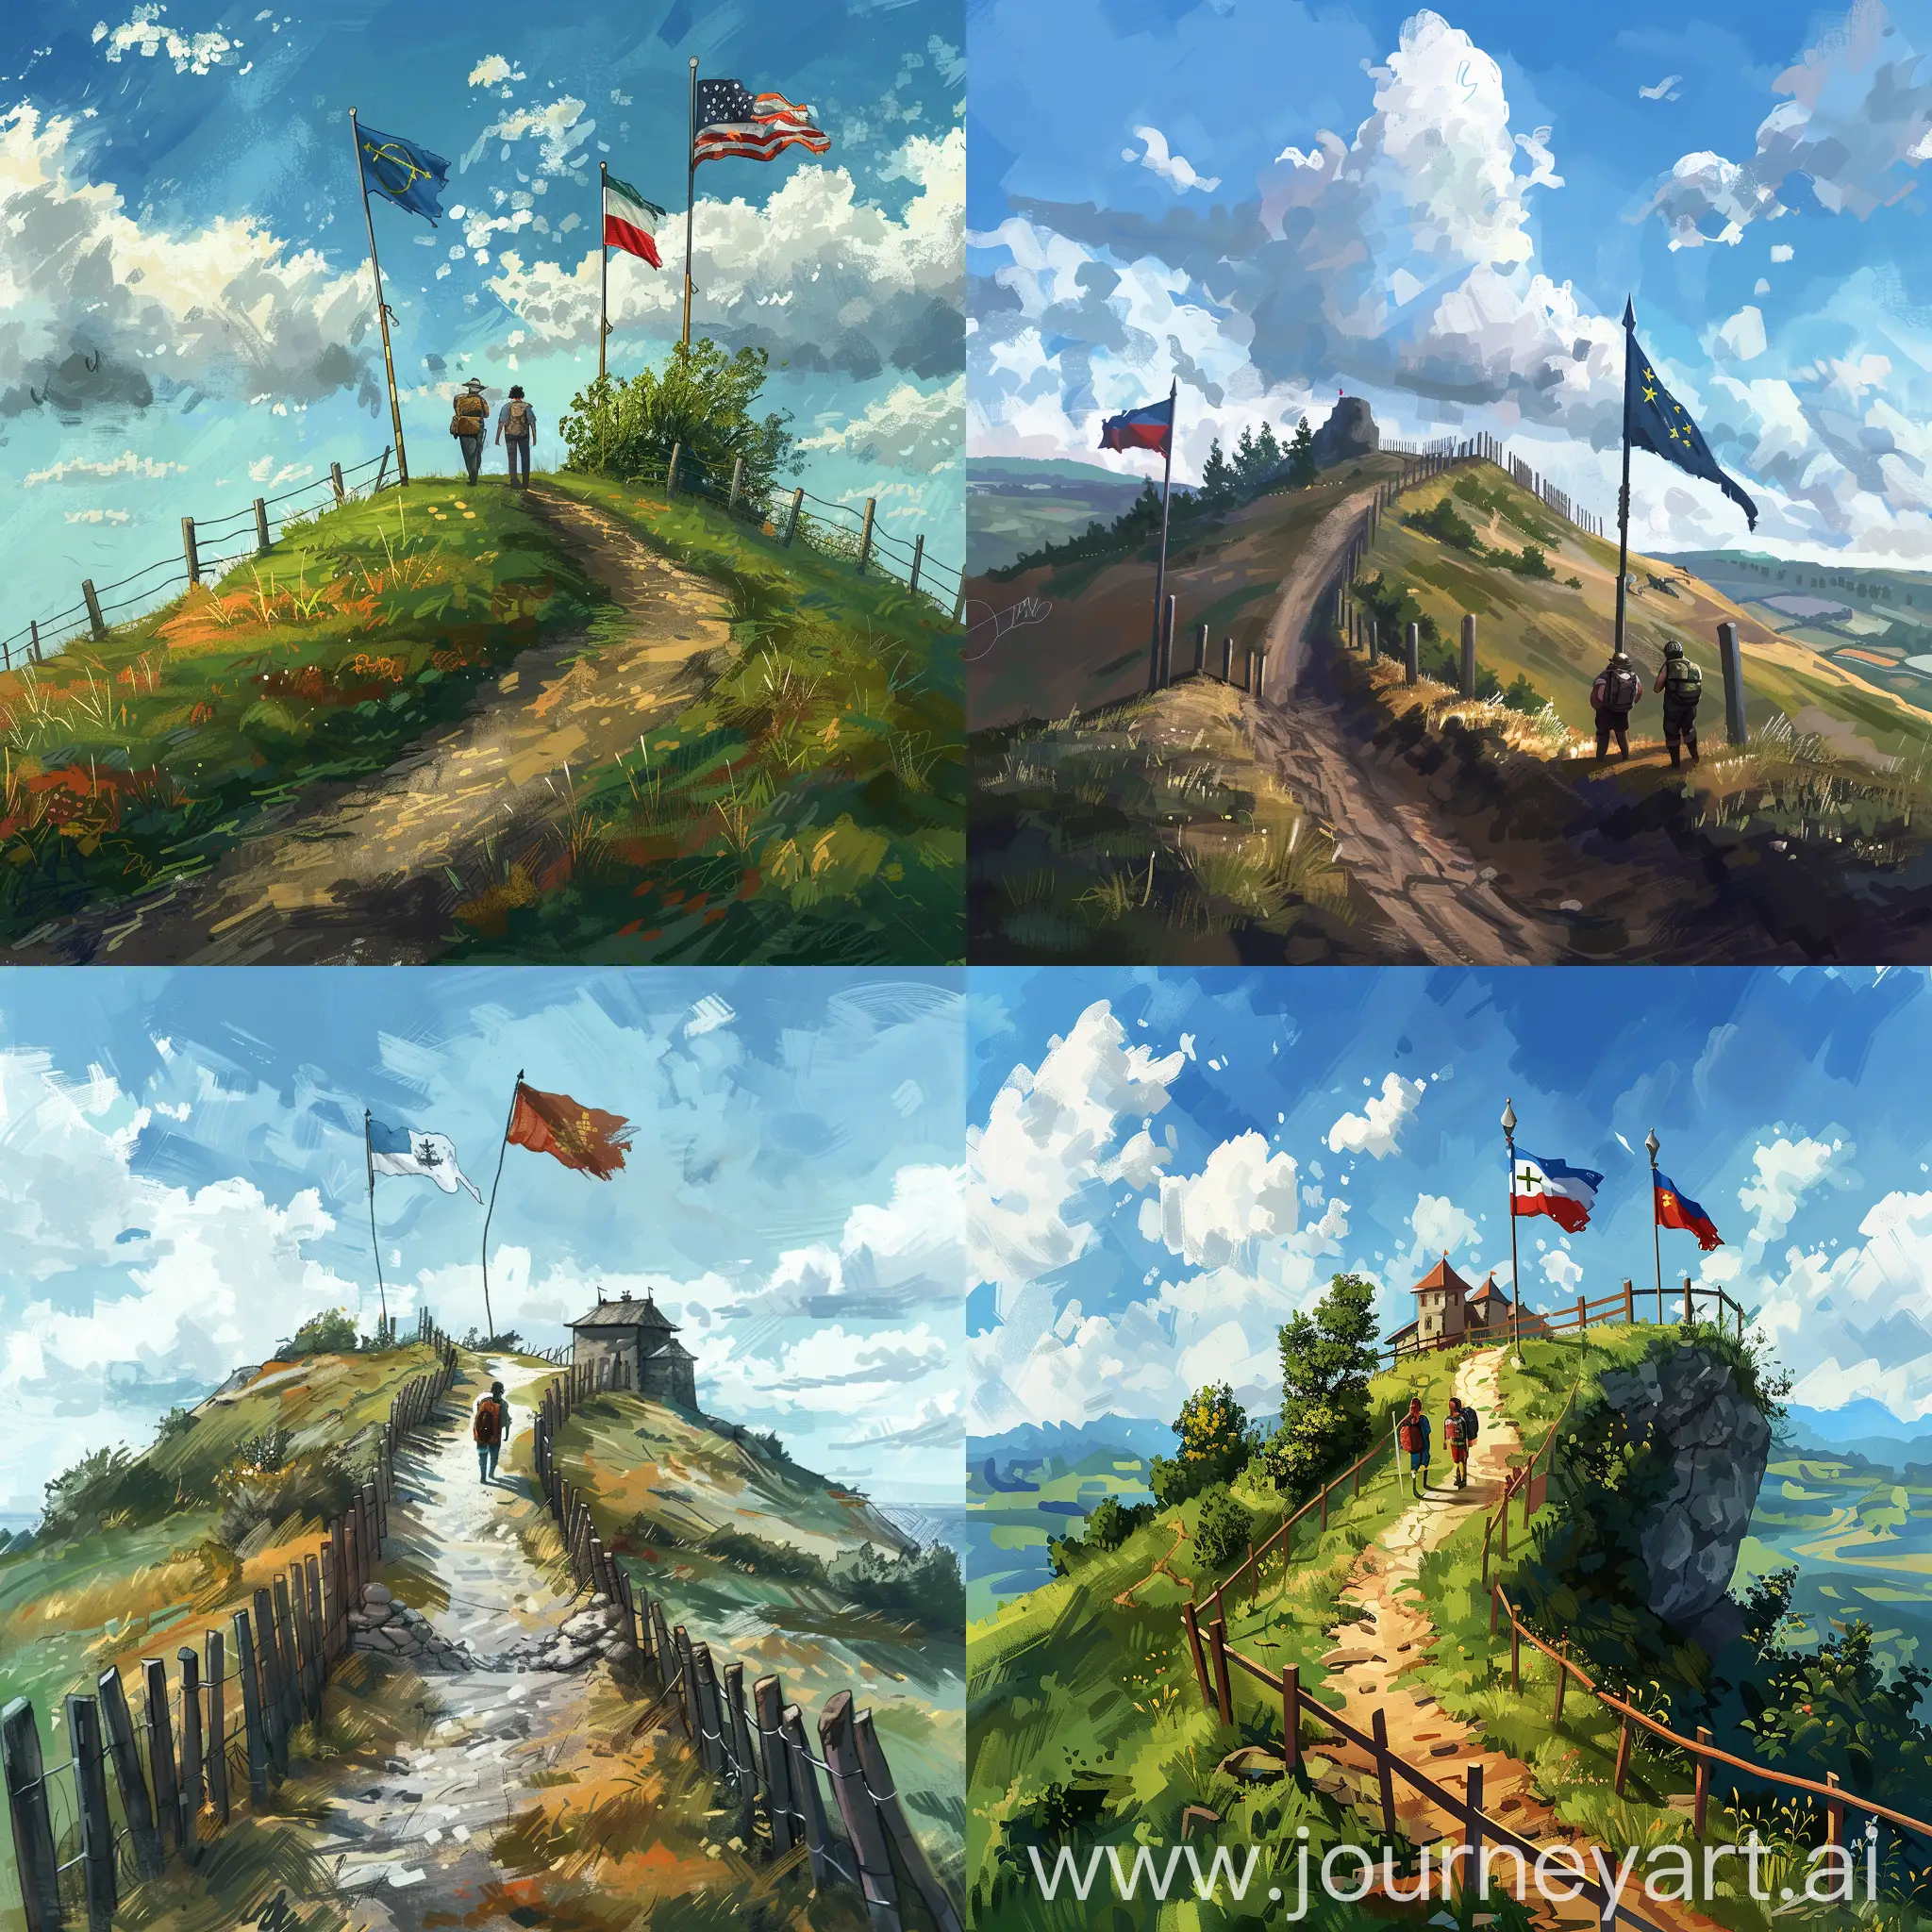 Generate an image of border (without fences) between two countries on the picteresque hill. There should be flag on both sides (fictional flags) and 2 travellers that just met each other on this border